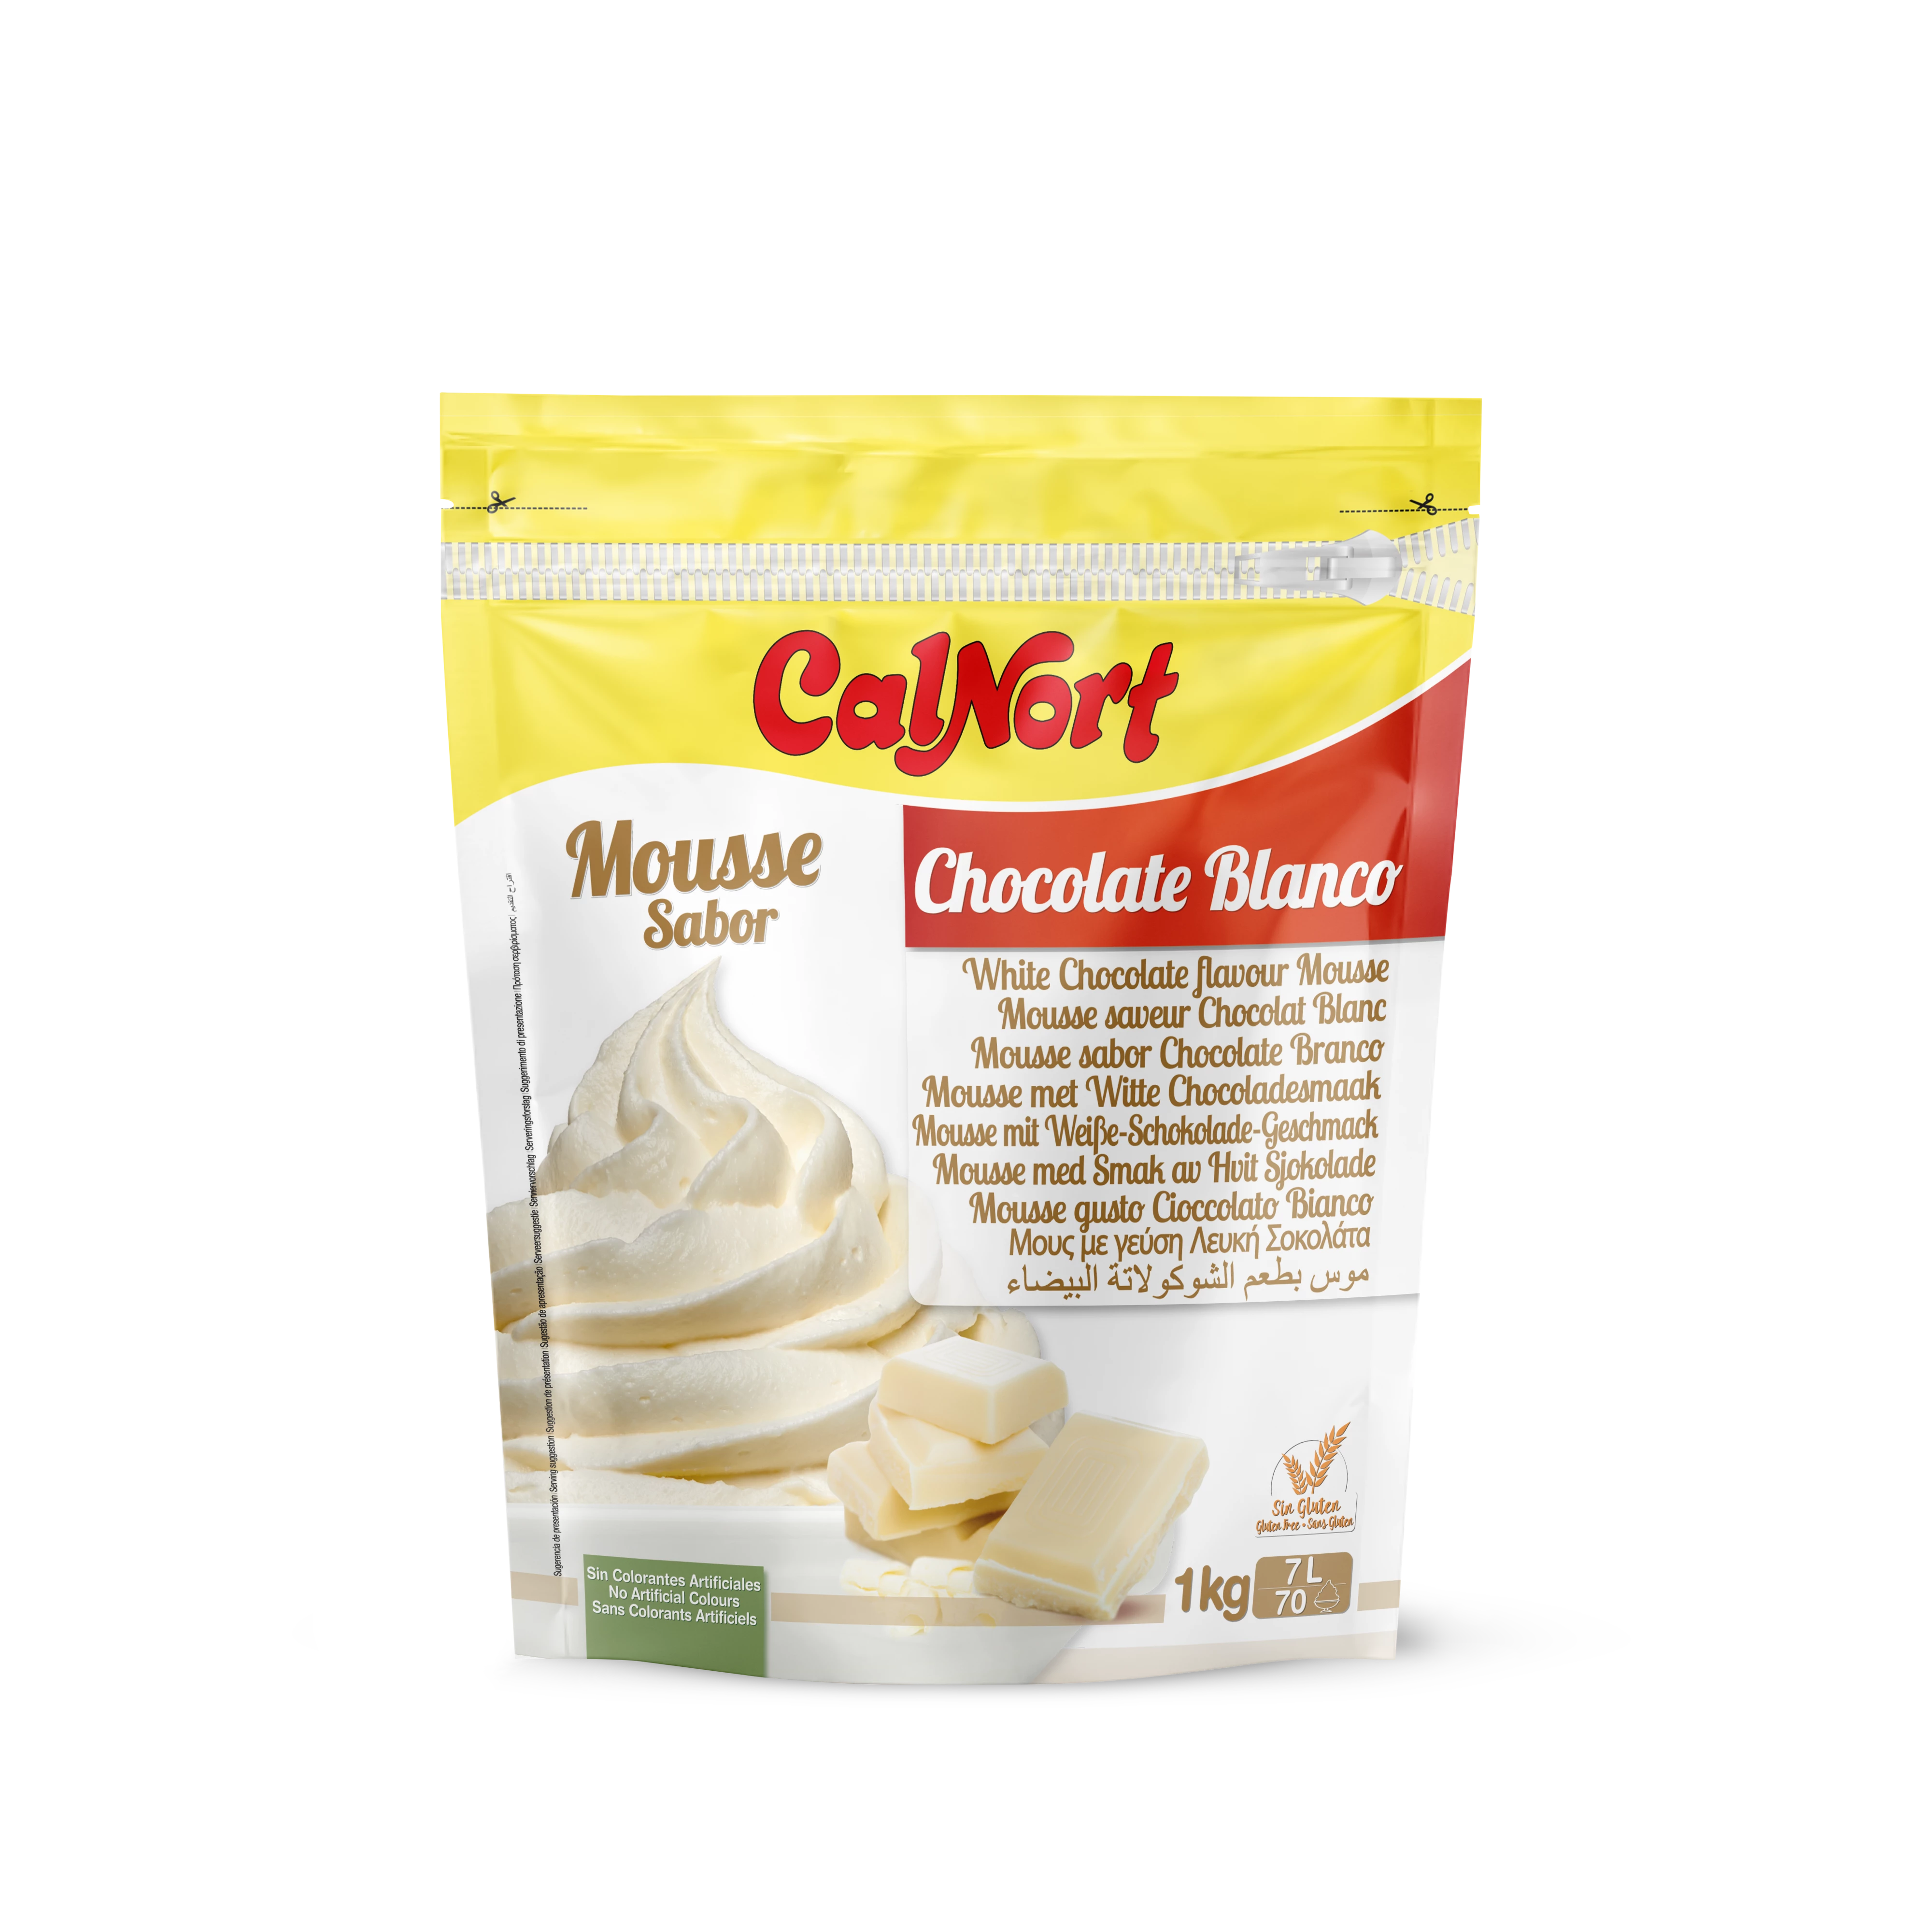 White Chocolate Flavor Mousse 1 Kg - CALNORT